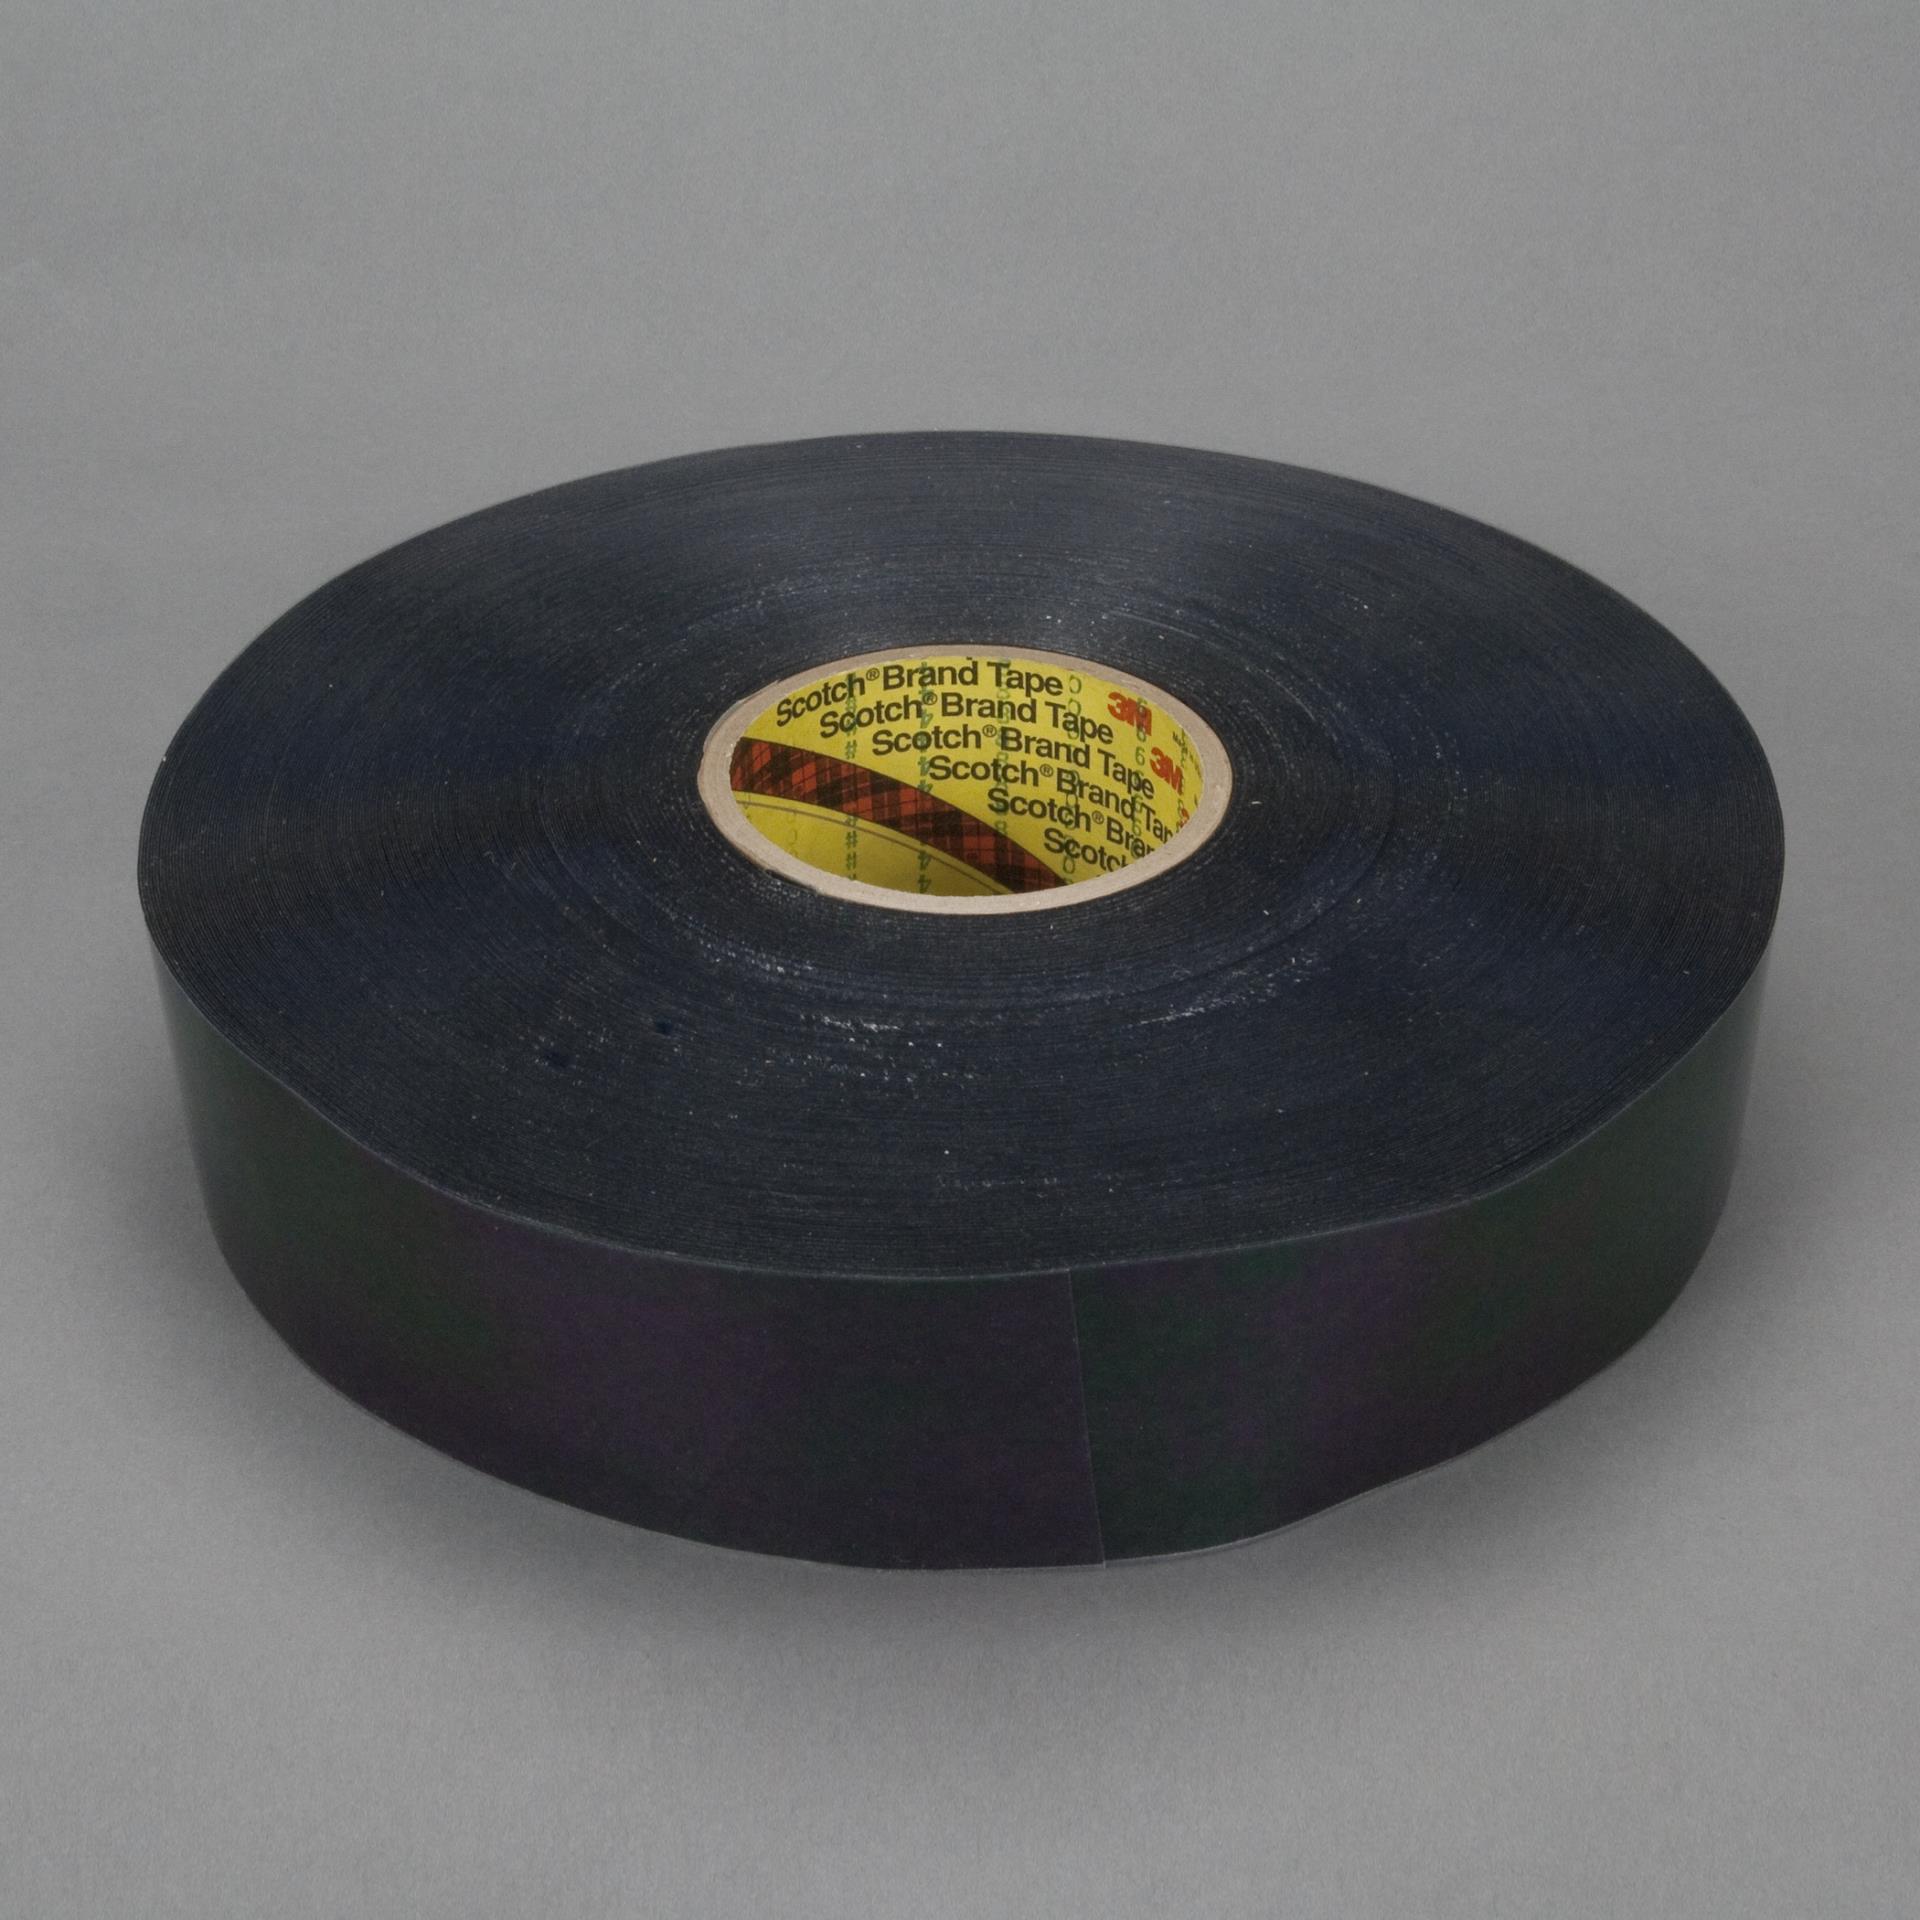 00051115255816 3M™ Conformable Sound Management Film Tape 9343, Black,  13/32 in x 36 yd, 72 rolls per case Aircraft products 3M 9369169